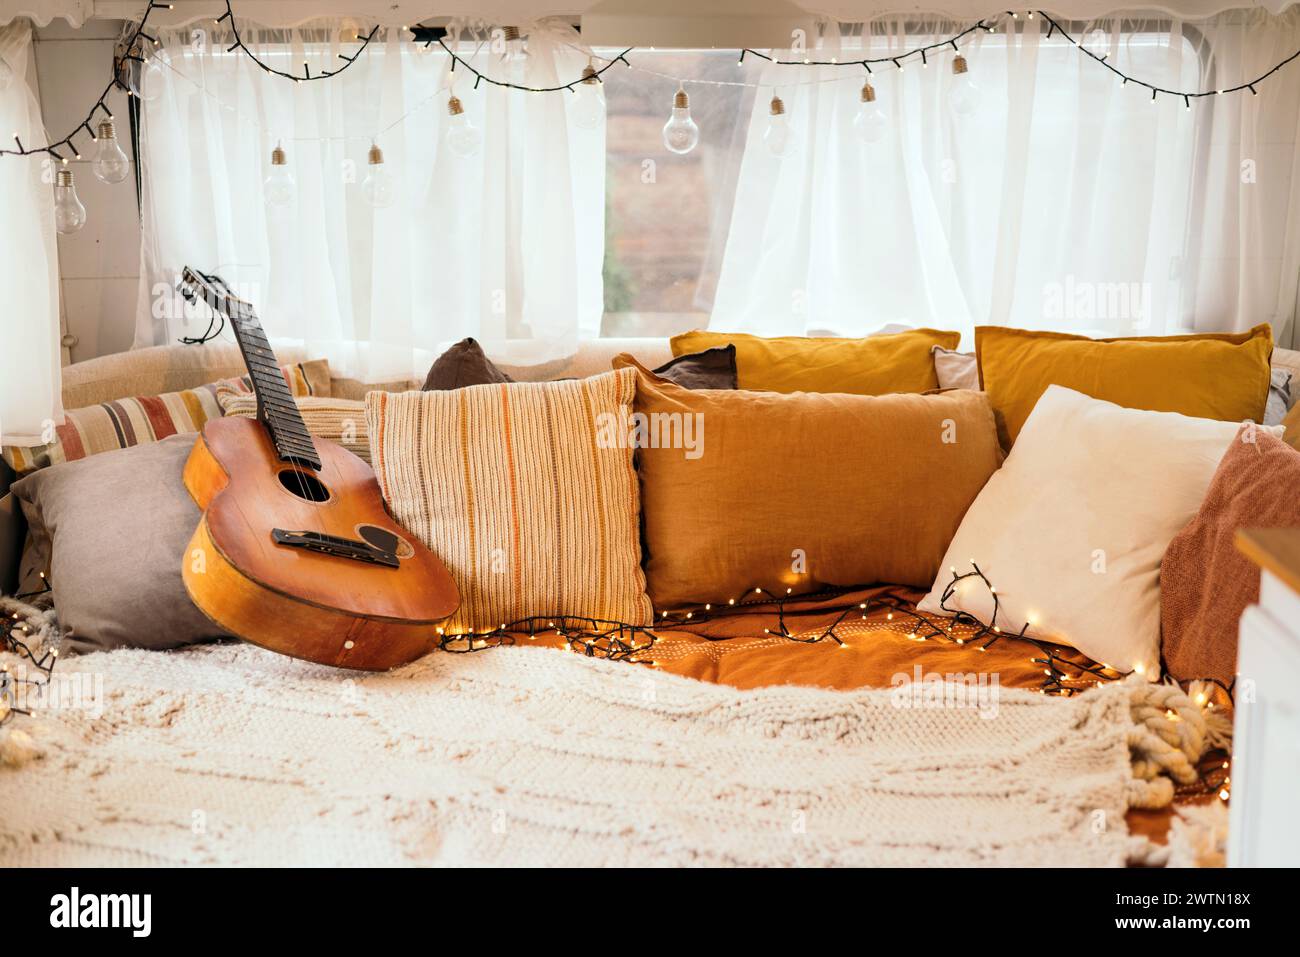 Cozy bedroom interior inspired by autumn colors. Pillows, light bed of a mobile home on wheels. Light bulbs. Stock Photo